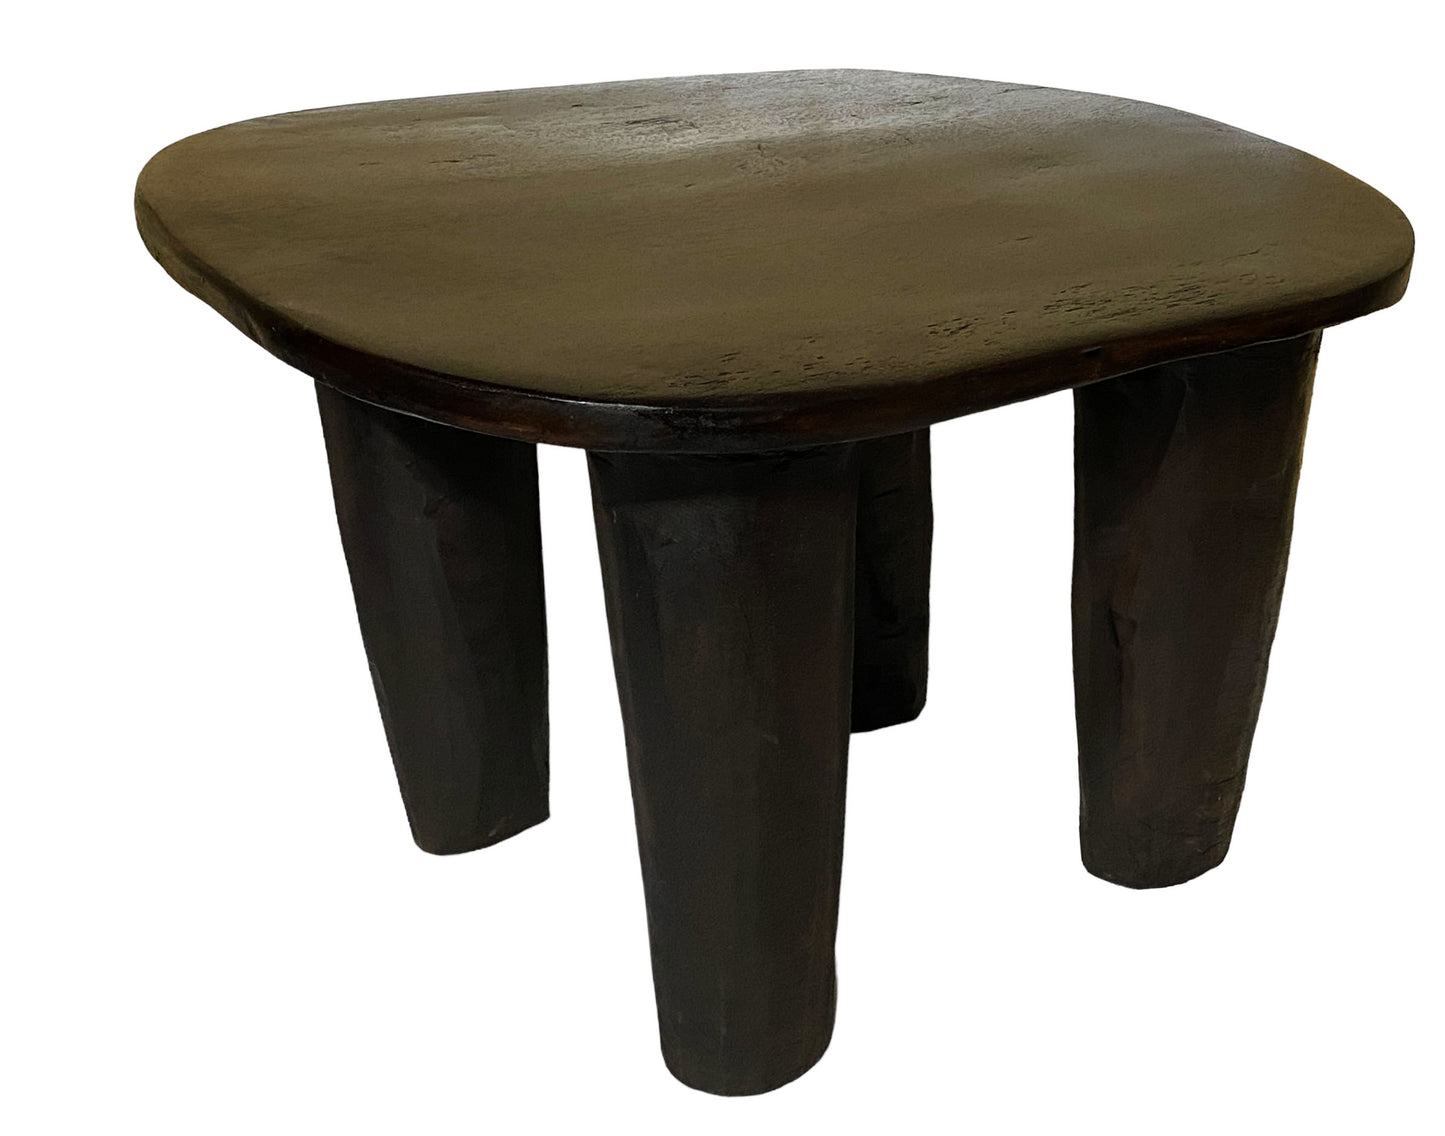 # 5910 African Carved Wood Senufo Table/Stool 25" W